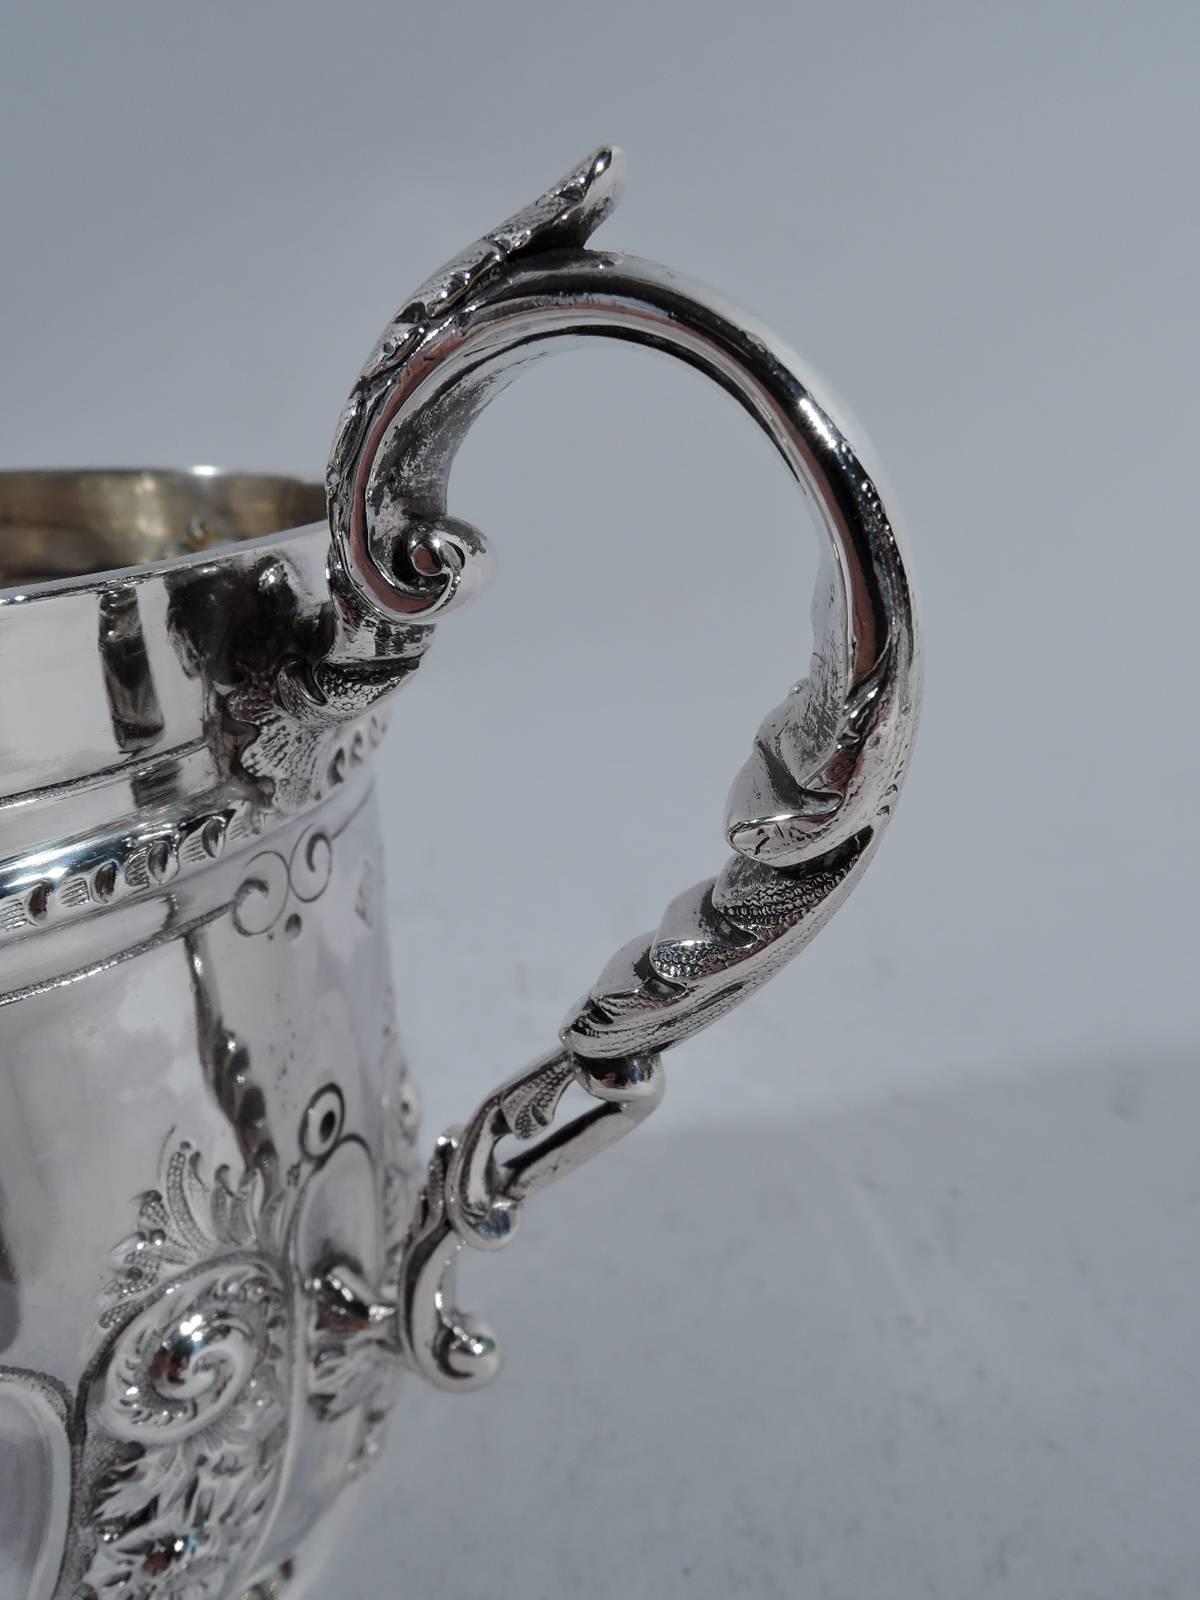 American Antique English Sterling Silver Baby Cup by Martin, Hall